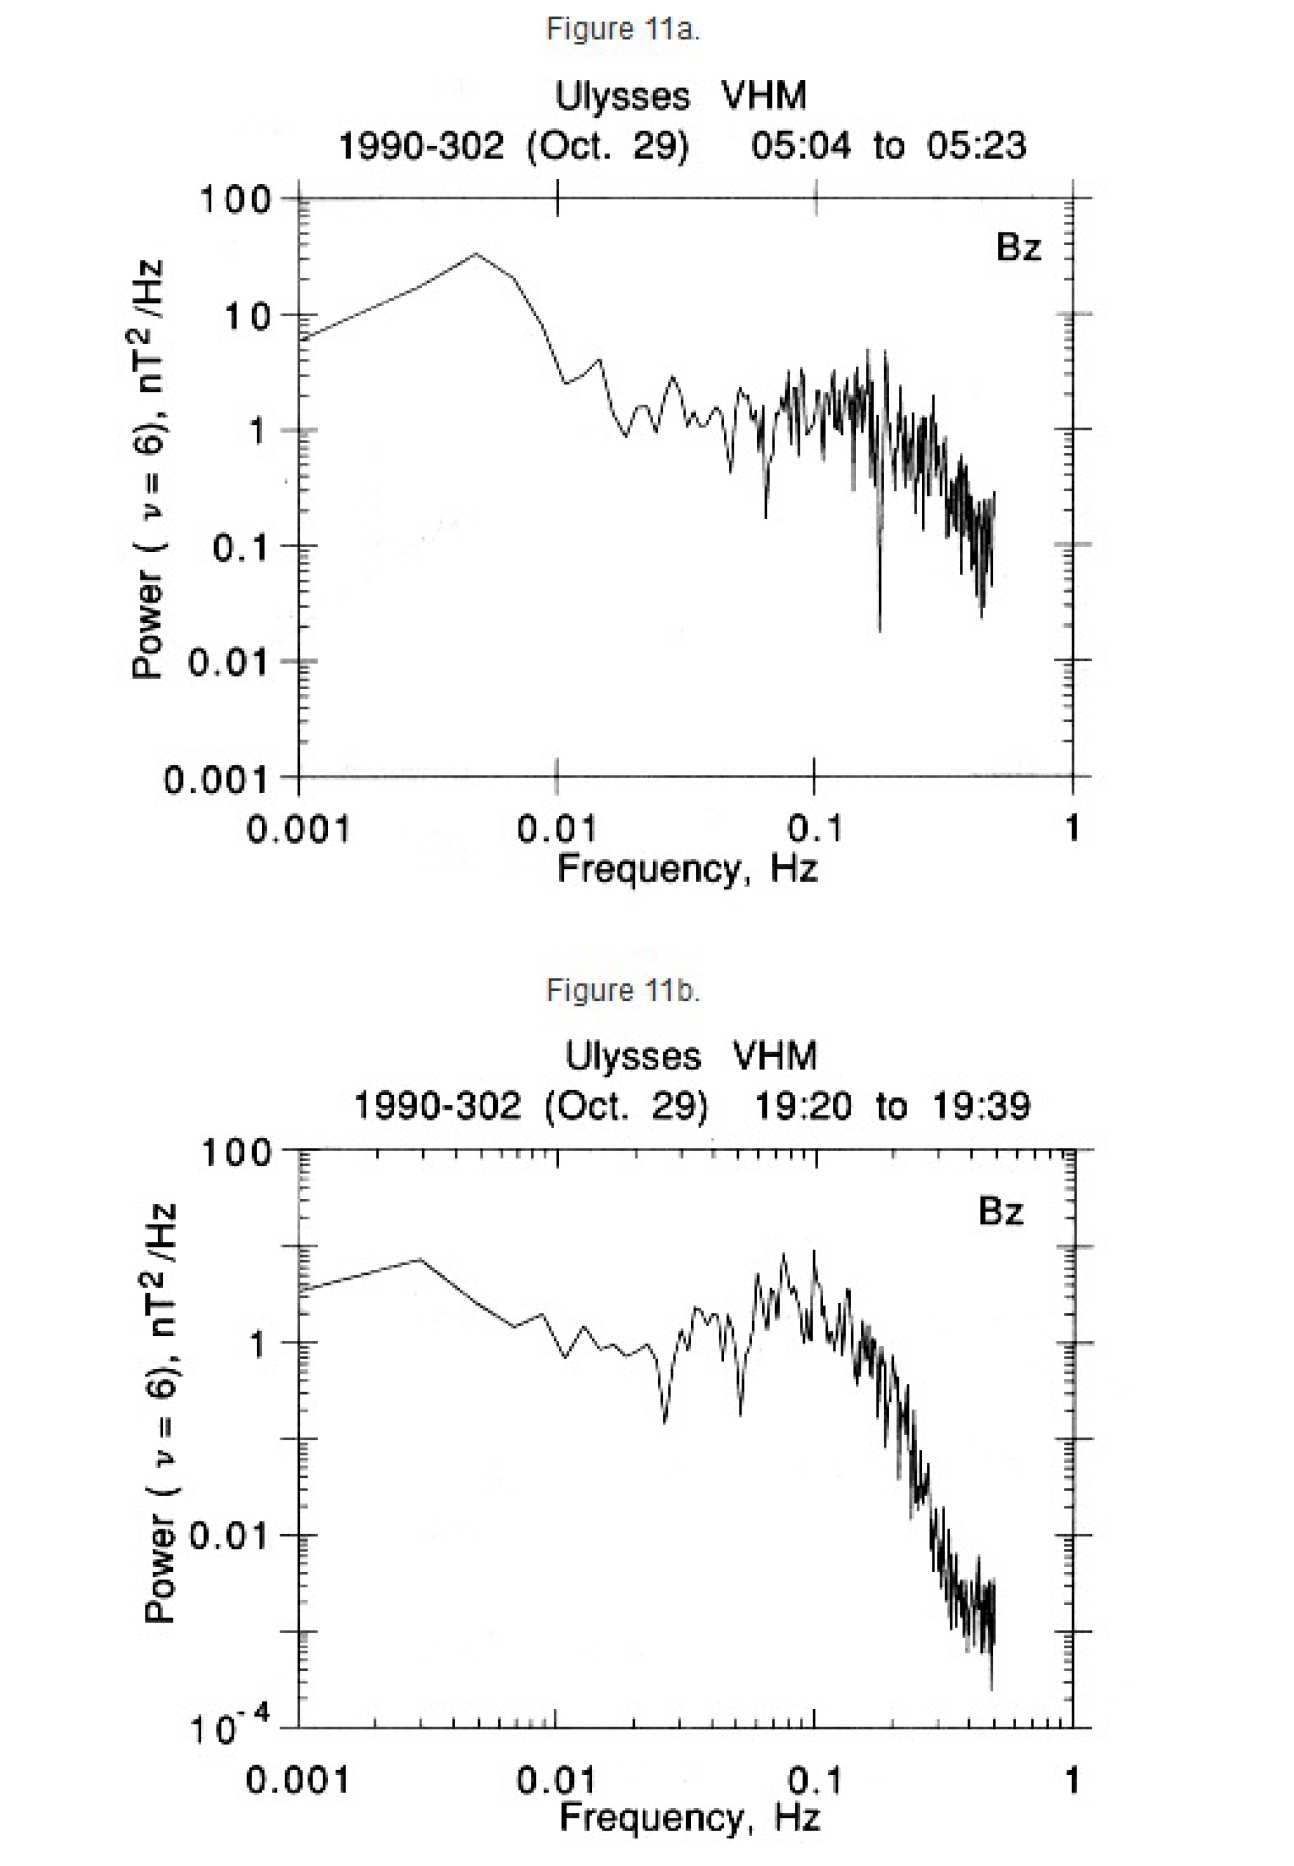 Figure 11a and 11b. Power spectrum (a) of the spin-aligned component of the magnetic field during the wave burst shown in Figure 10, and power spectrum of the same component of the field some 14 hours later on the same day, indicating that there were also waves at a somewhat lower frequency (0.1 Hz vs. 0.2 Hz) at the later time, but with increased amplitude, although mostly in the components (therefore direction) rather than in the magnitude of the magnetic field.